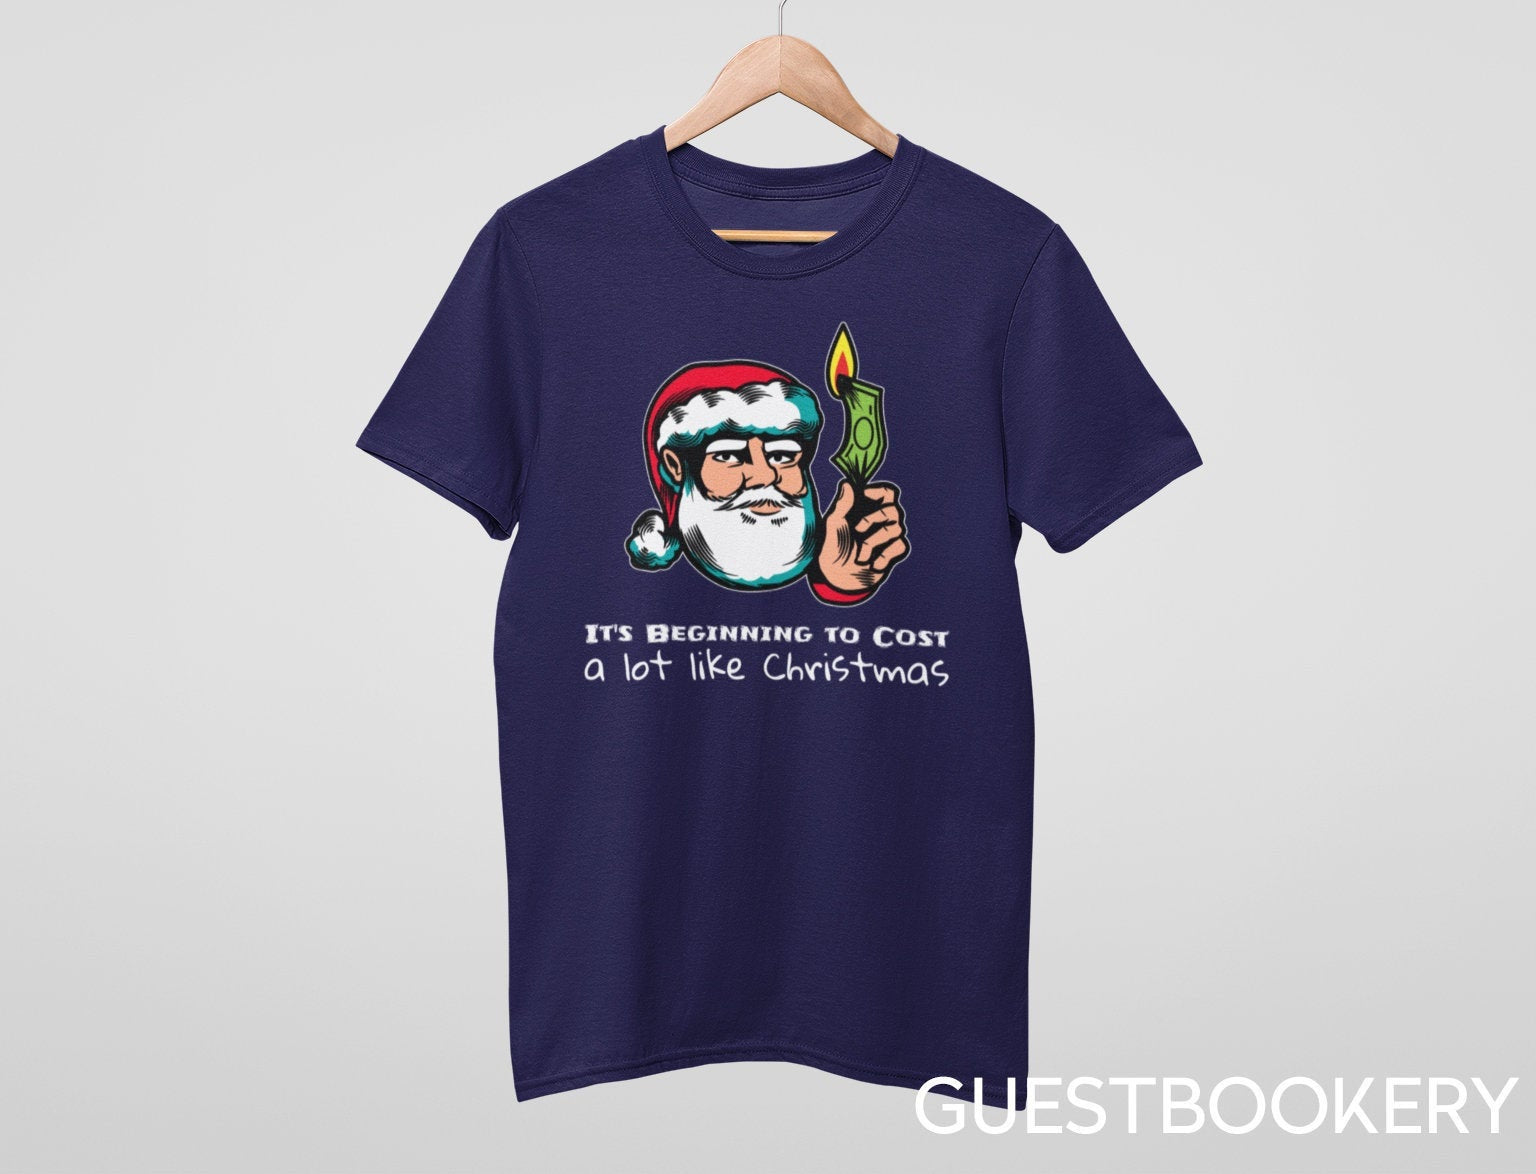 It's Beginning to Cost a lot Like Christmas T-shirt